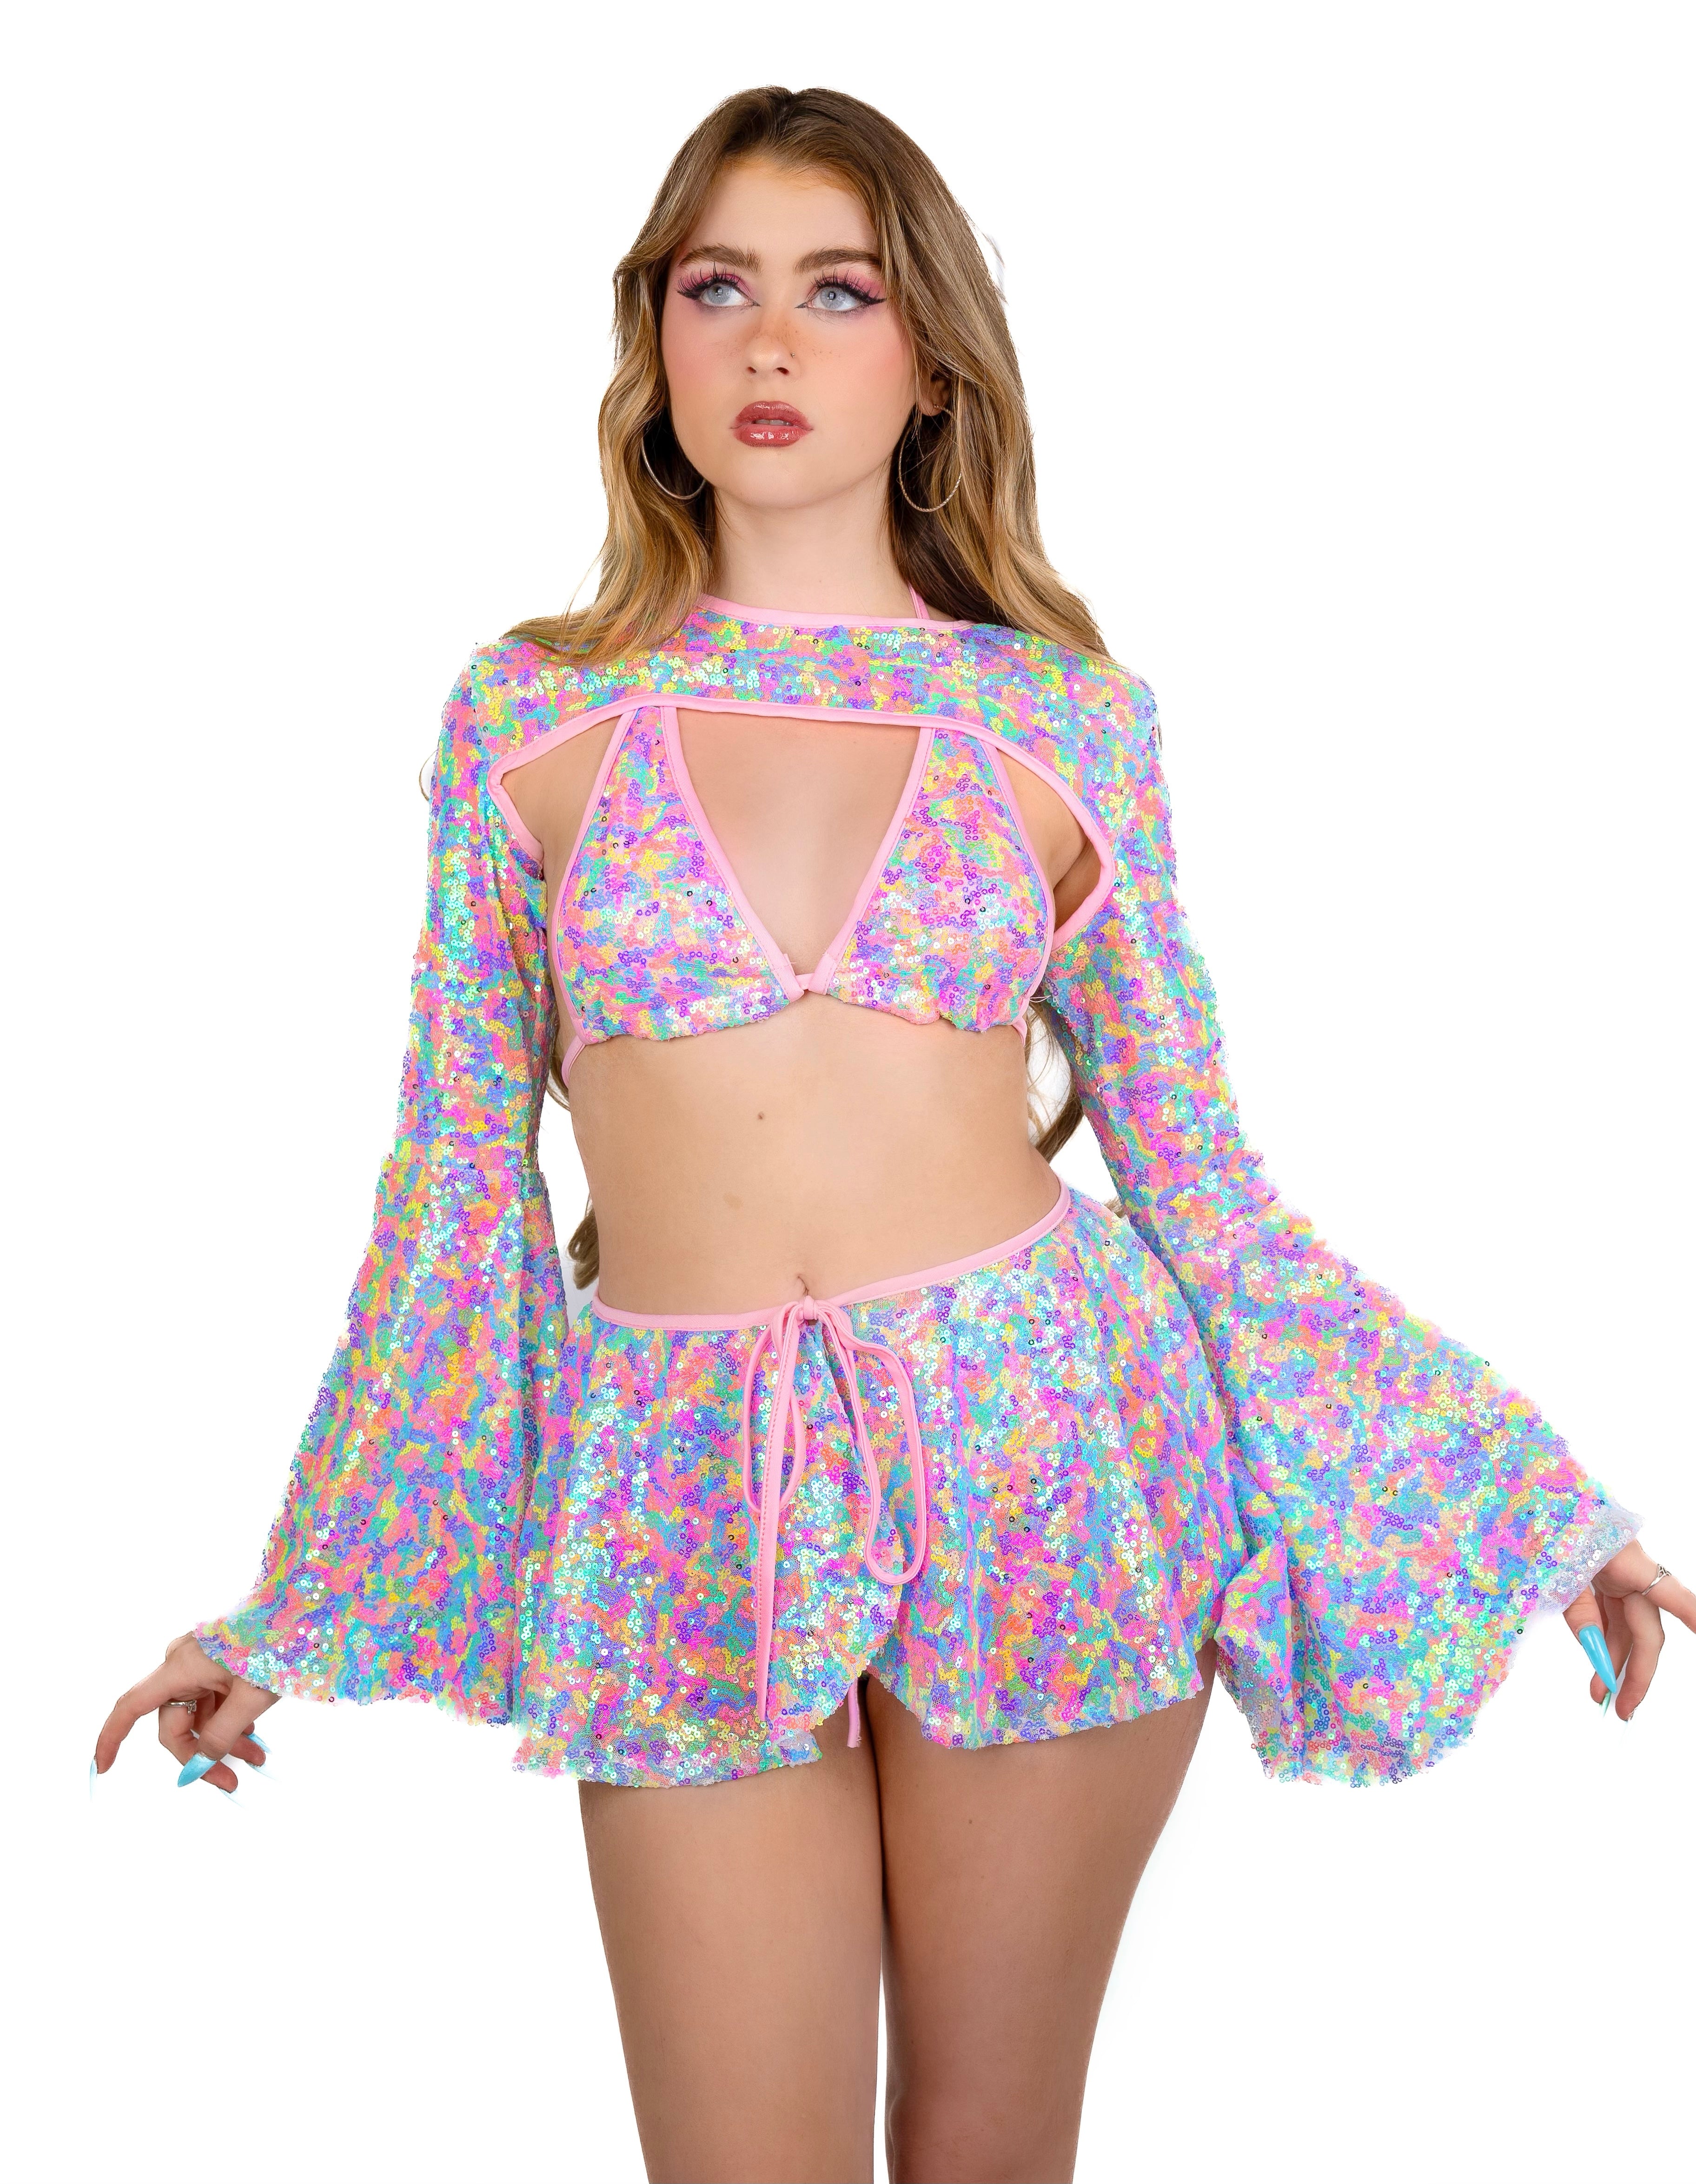 FULL OUTFIT- Candy Goddess Sequin Set (4 pcs)